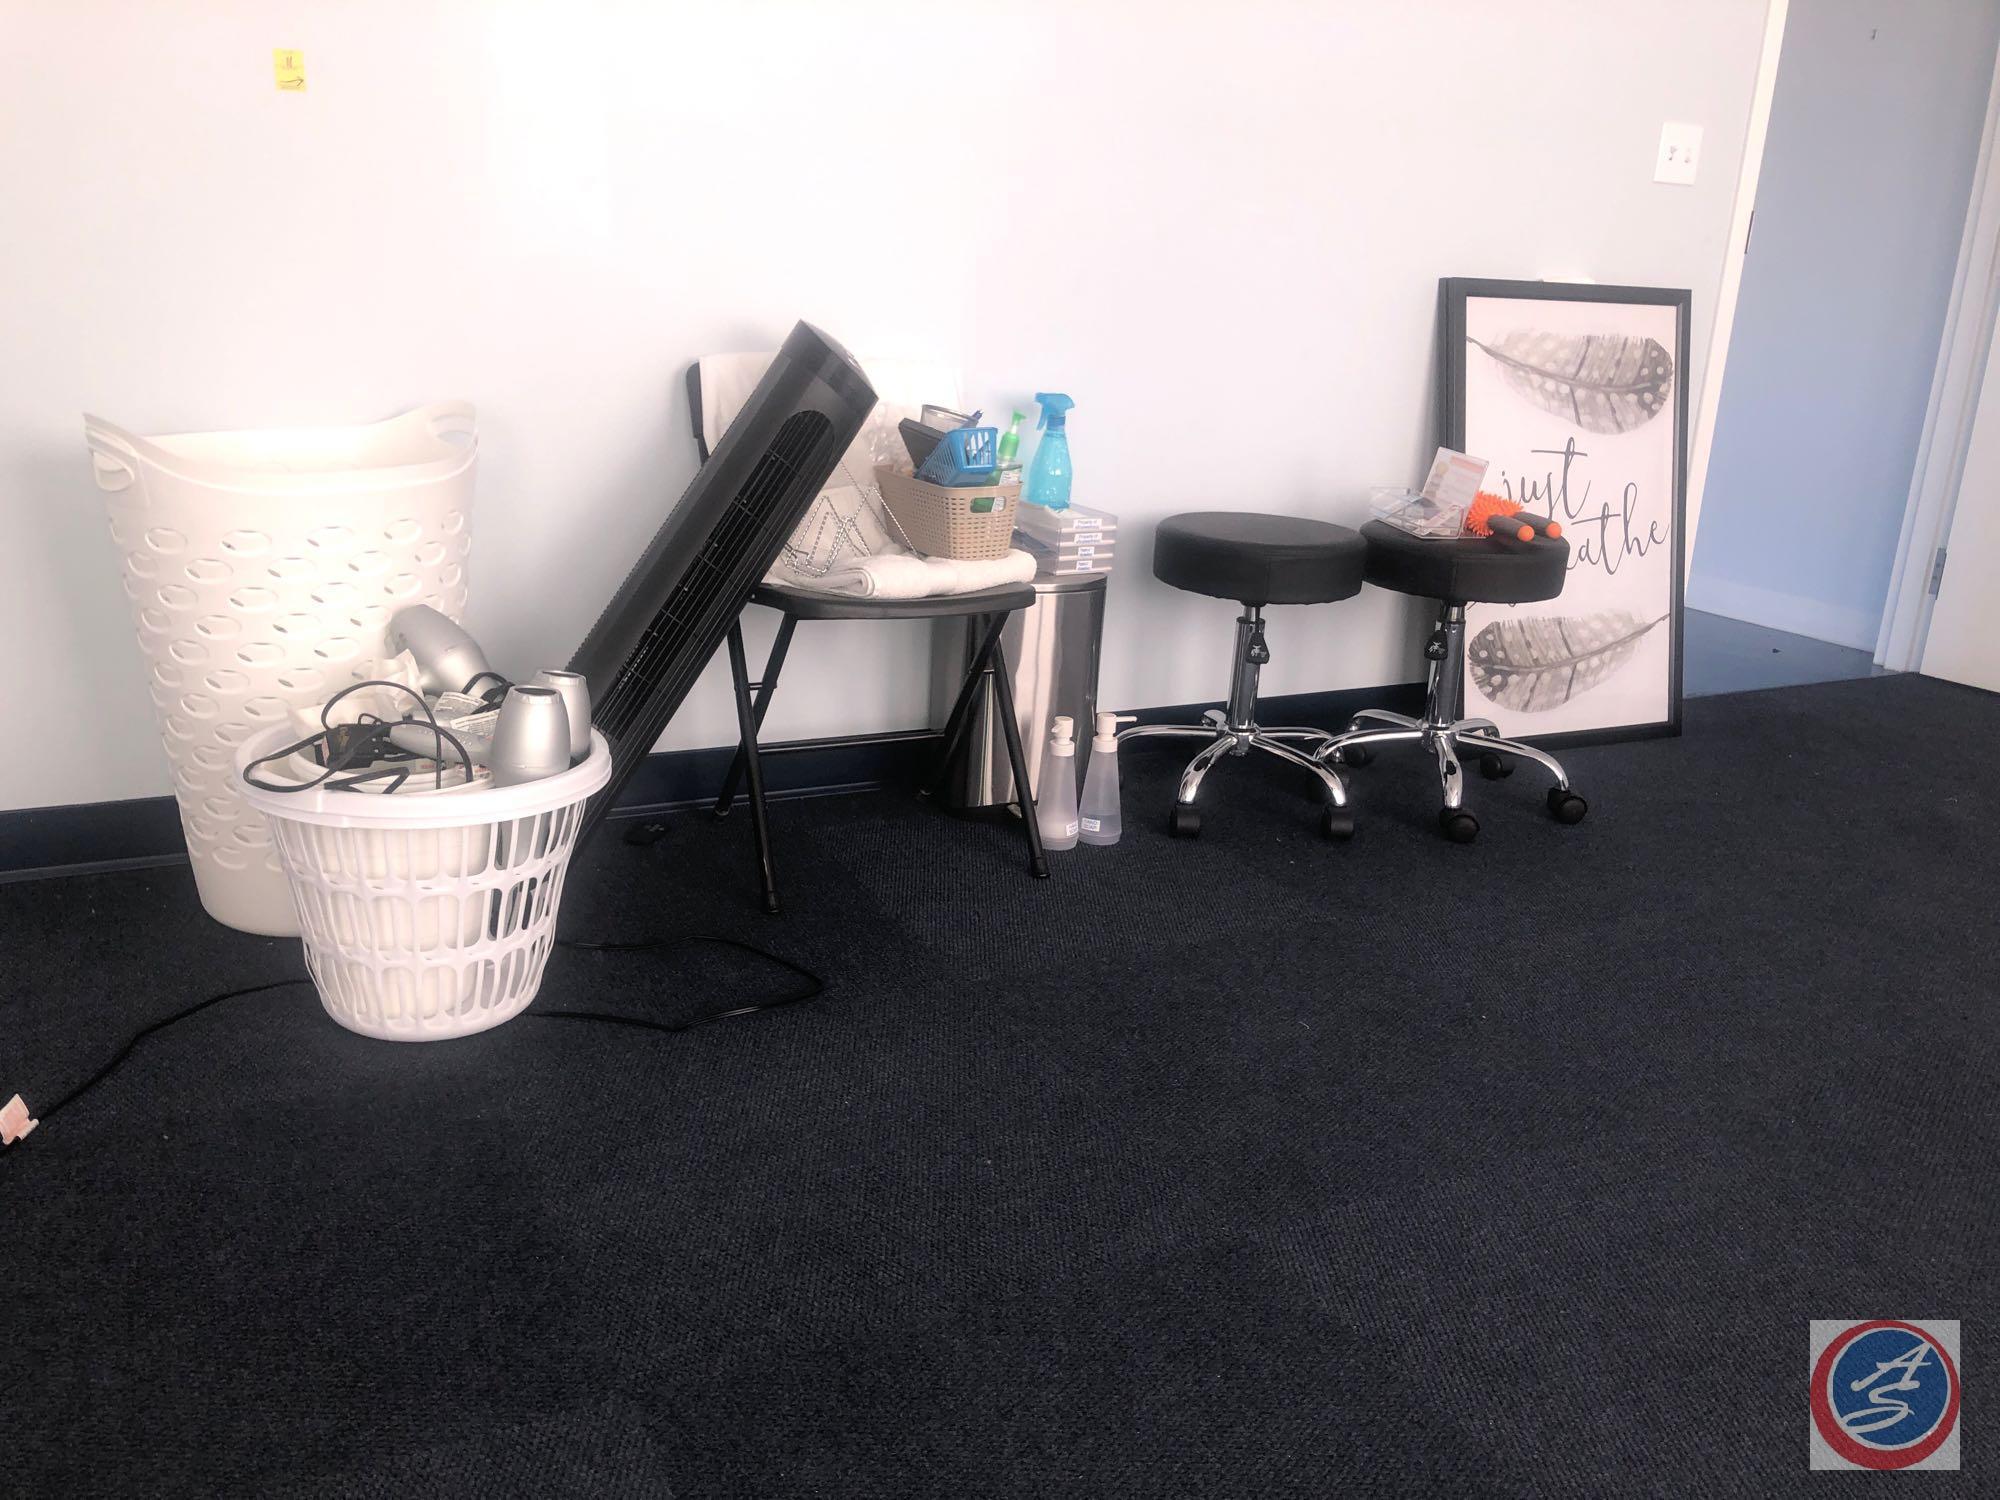 (2) Rolling Adjustable Stools, (2) Large Hampers, (3) ION Hair Dryers, (2) Framed Prints That Say